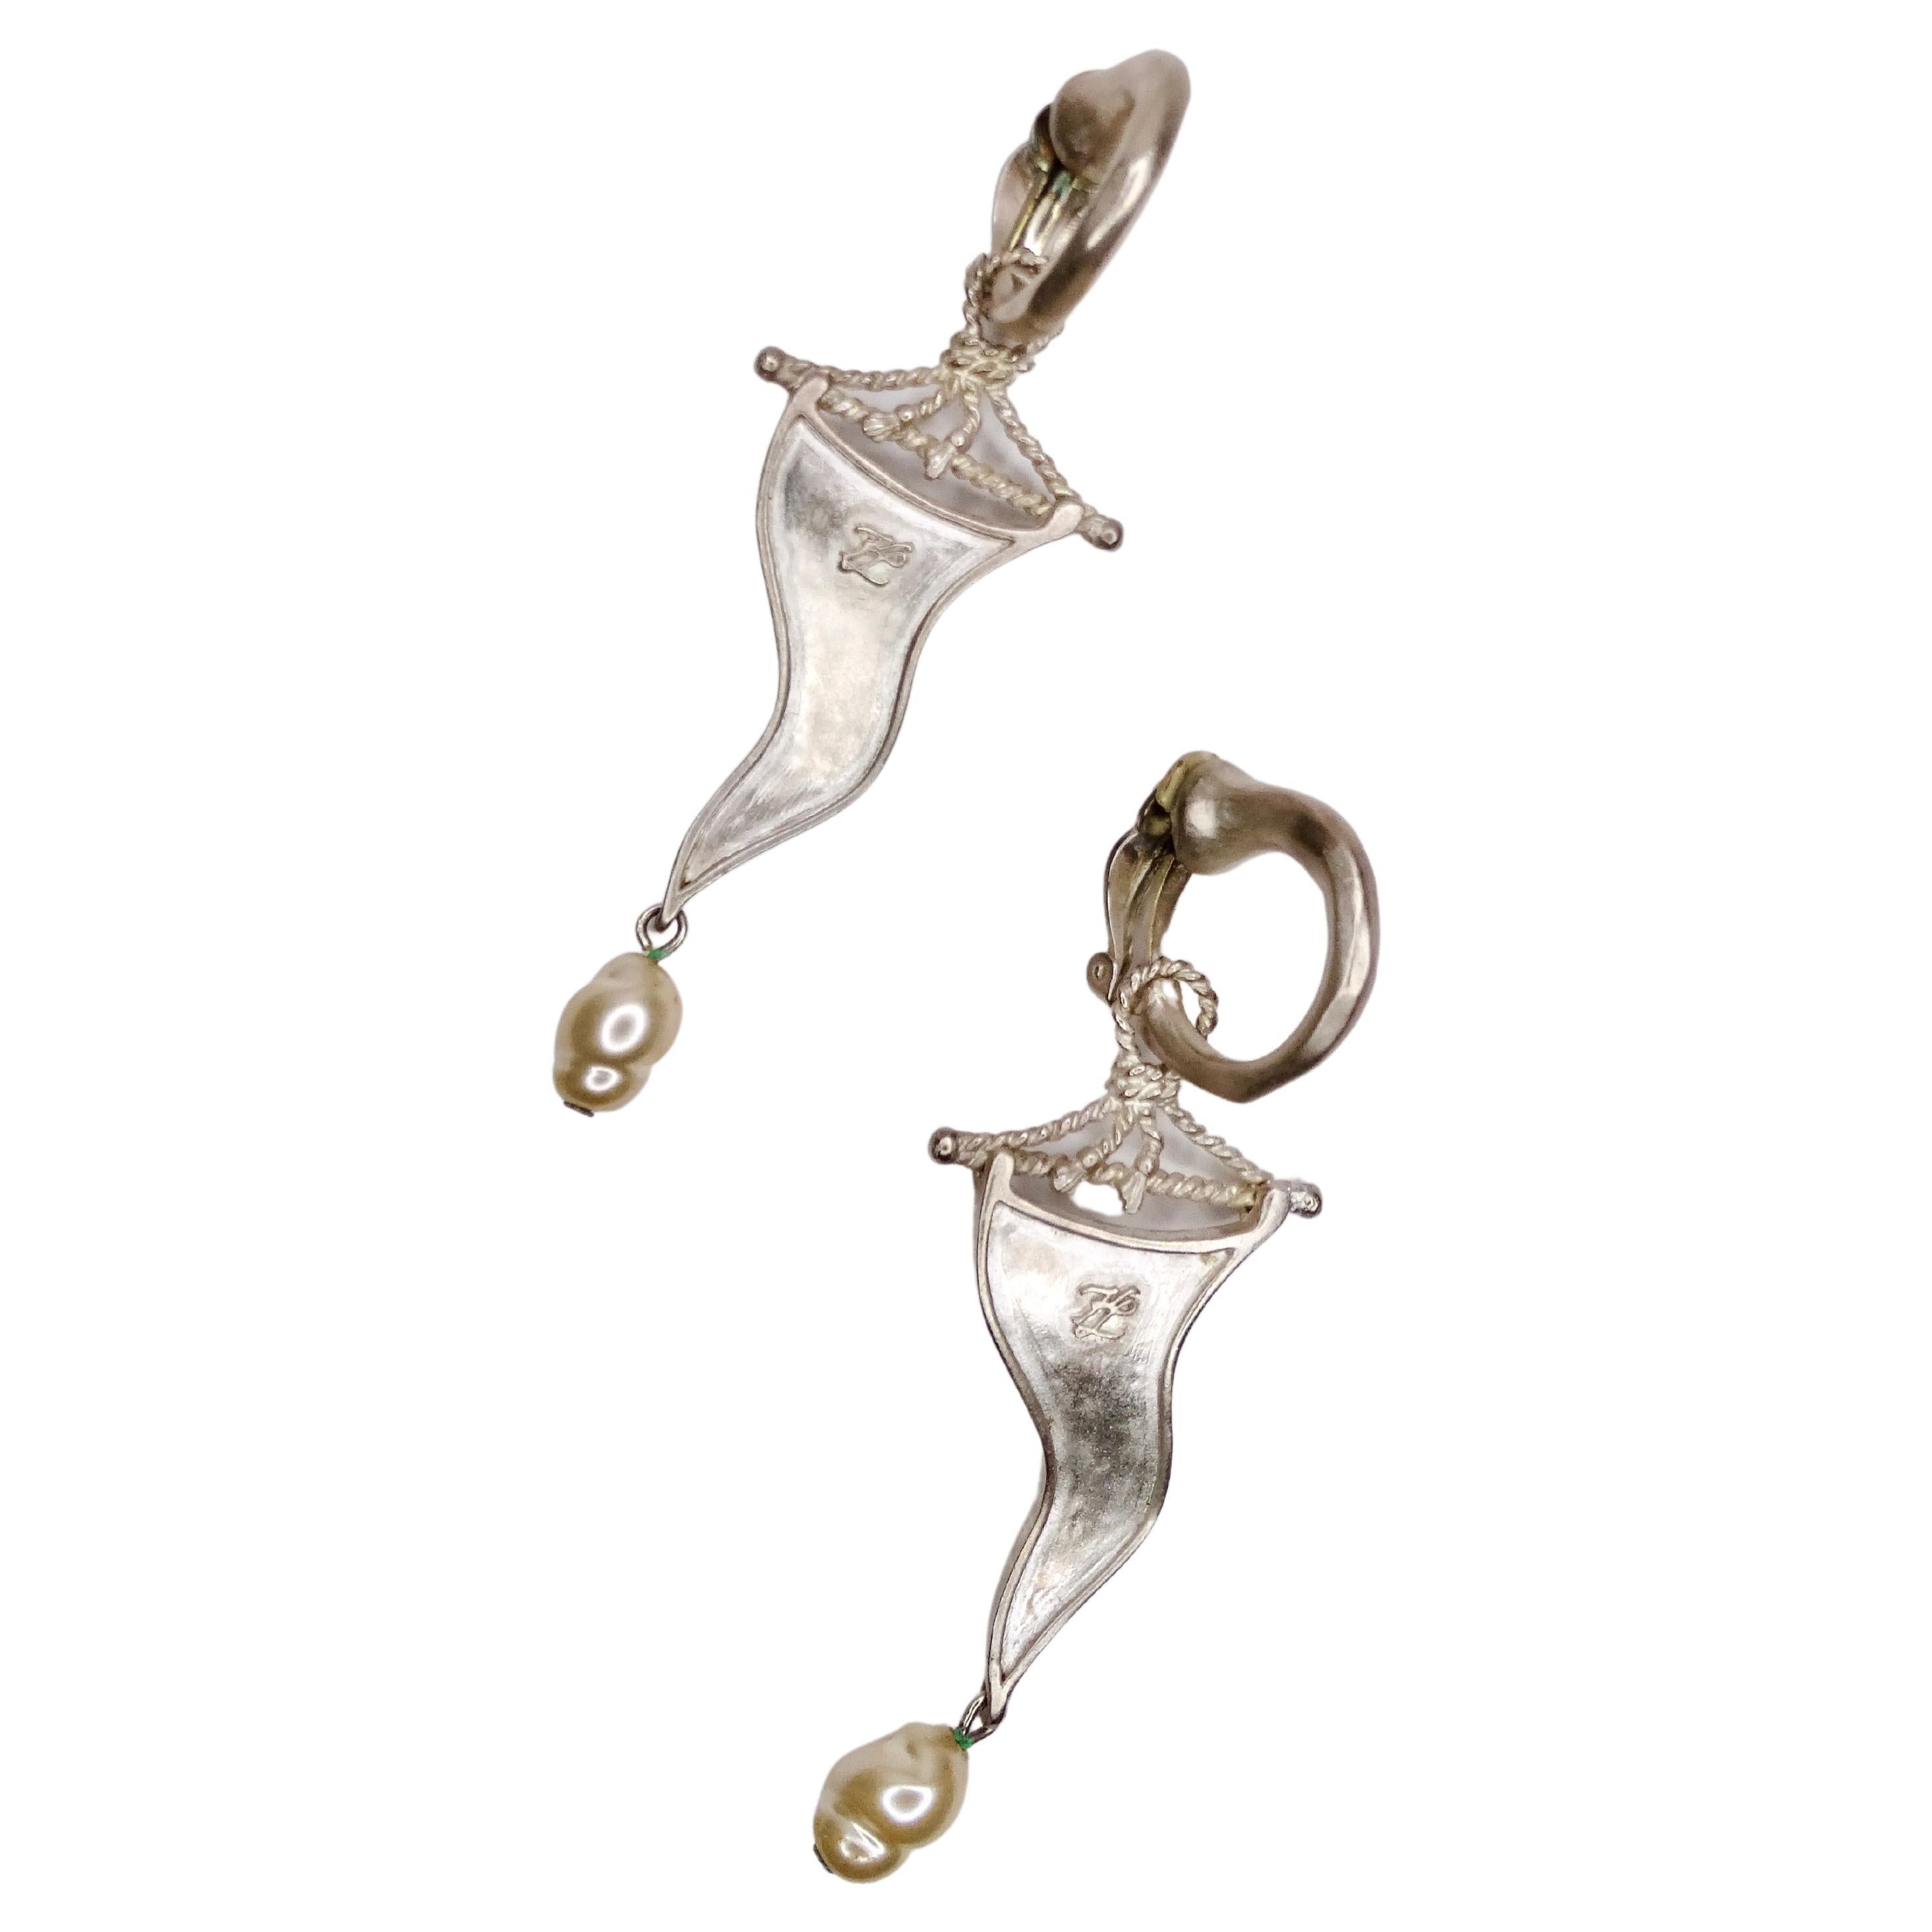 Keep a piece of Karl Lagerfeld close to your heart by getting these fun and flirty costume collection earrings. It features a metal flag with intricate rope detailing and a dainty pear dangling from the bottom. When searching for the perfect earring